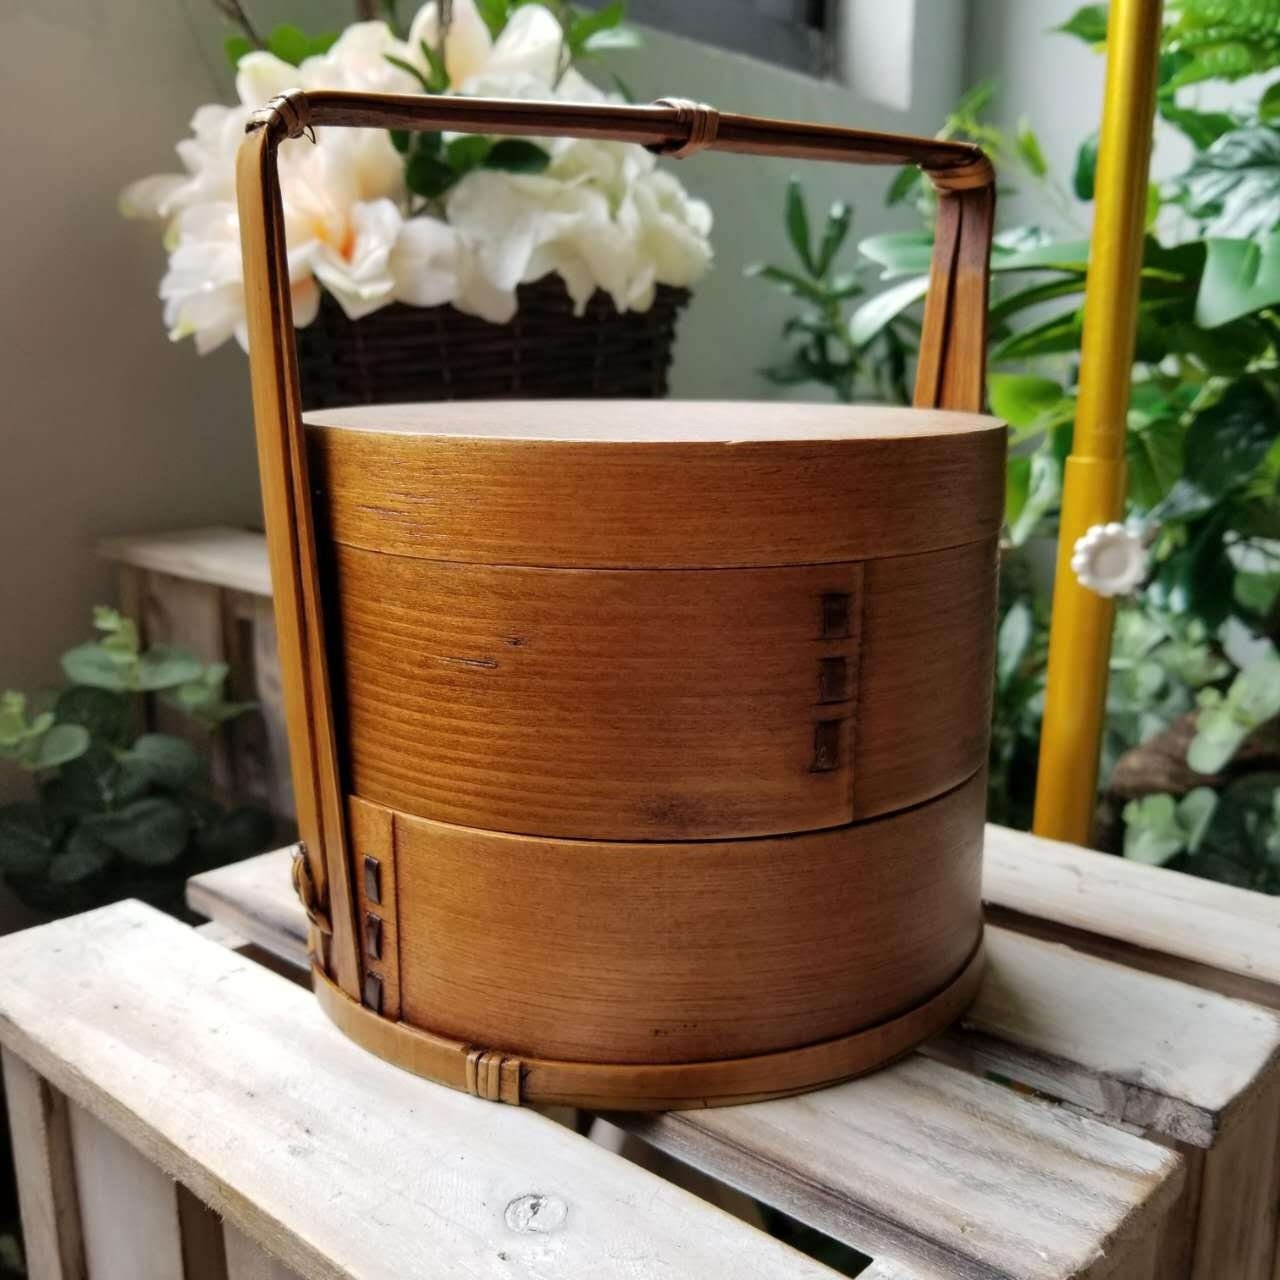 Japanese Style Large Wooden Double-layer Portable Lunch Box | Bento box, Meal Prep, Eco-Friendly, Food Storage Container, Eco-Friendly - -